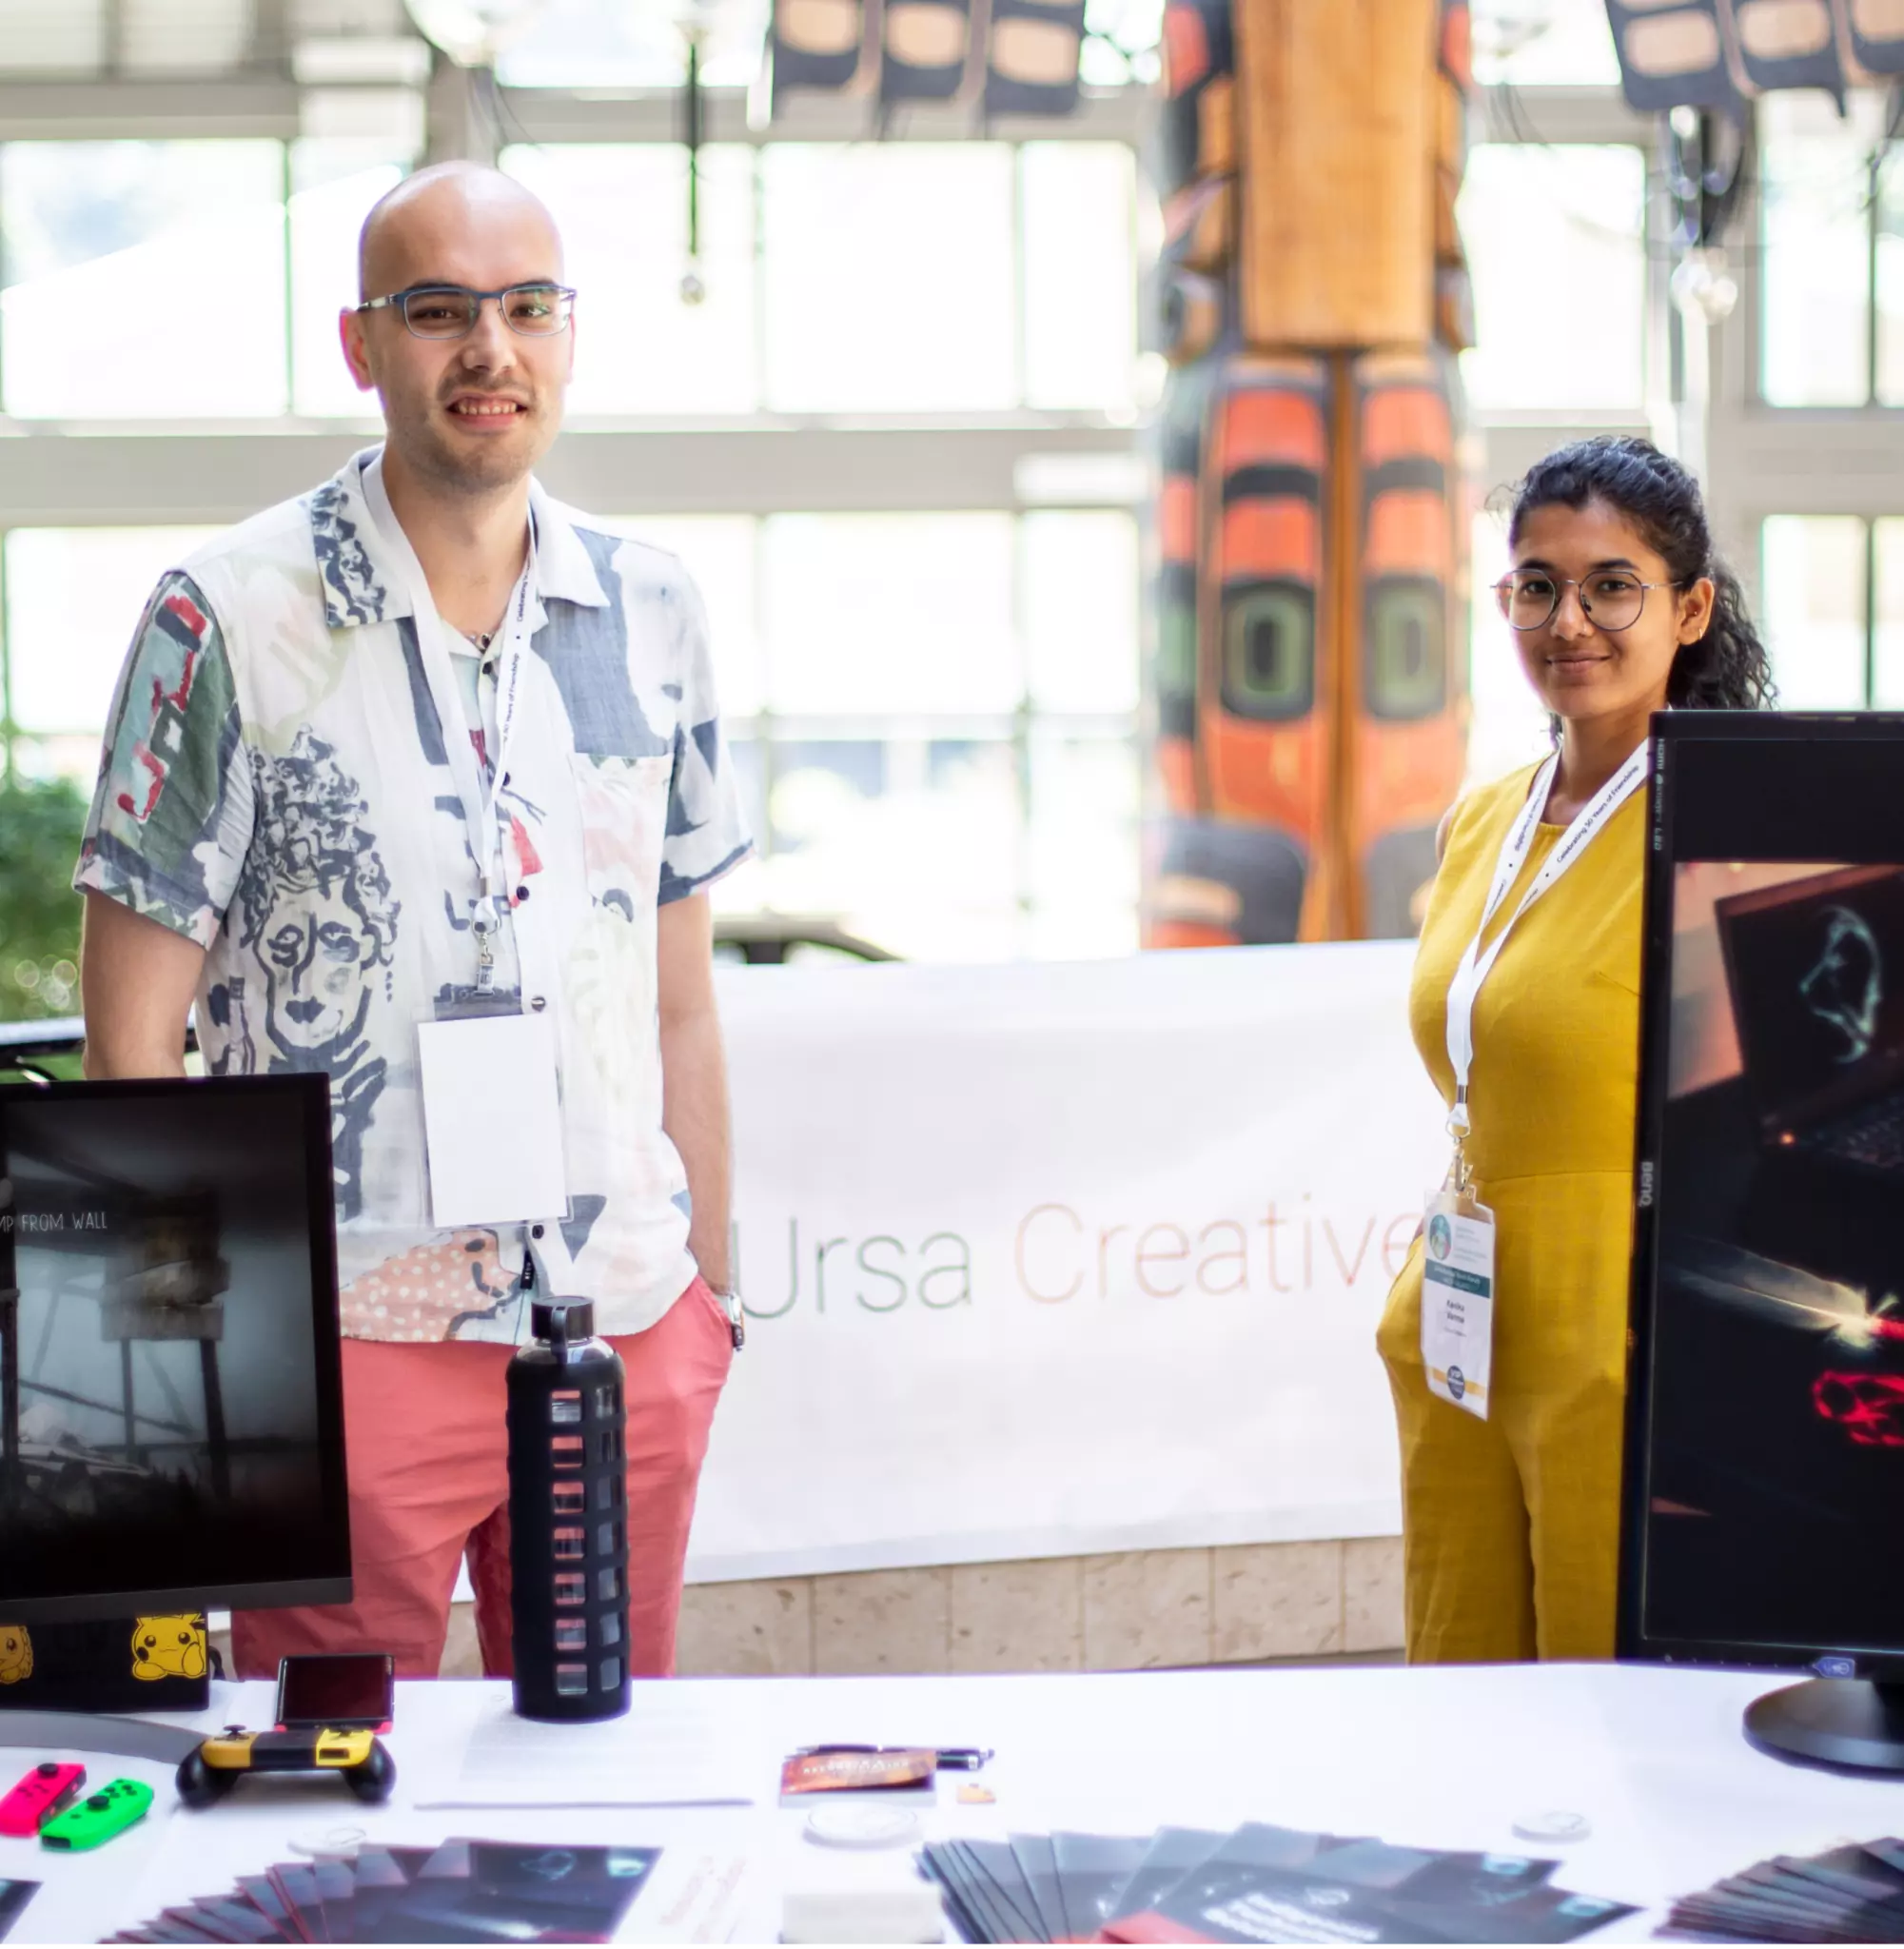 Two Ursa Creative members, Brendan Decontie and Kanika Verma, standing at a desk during a youth conference.